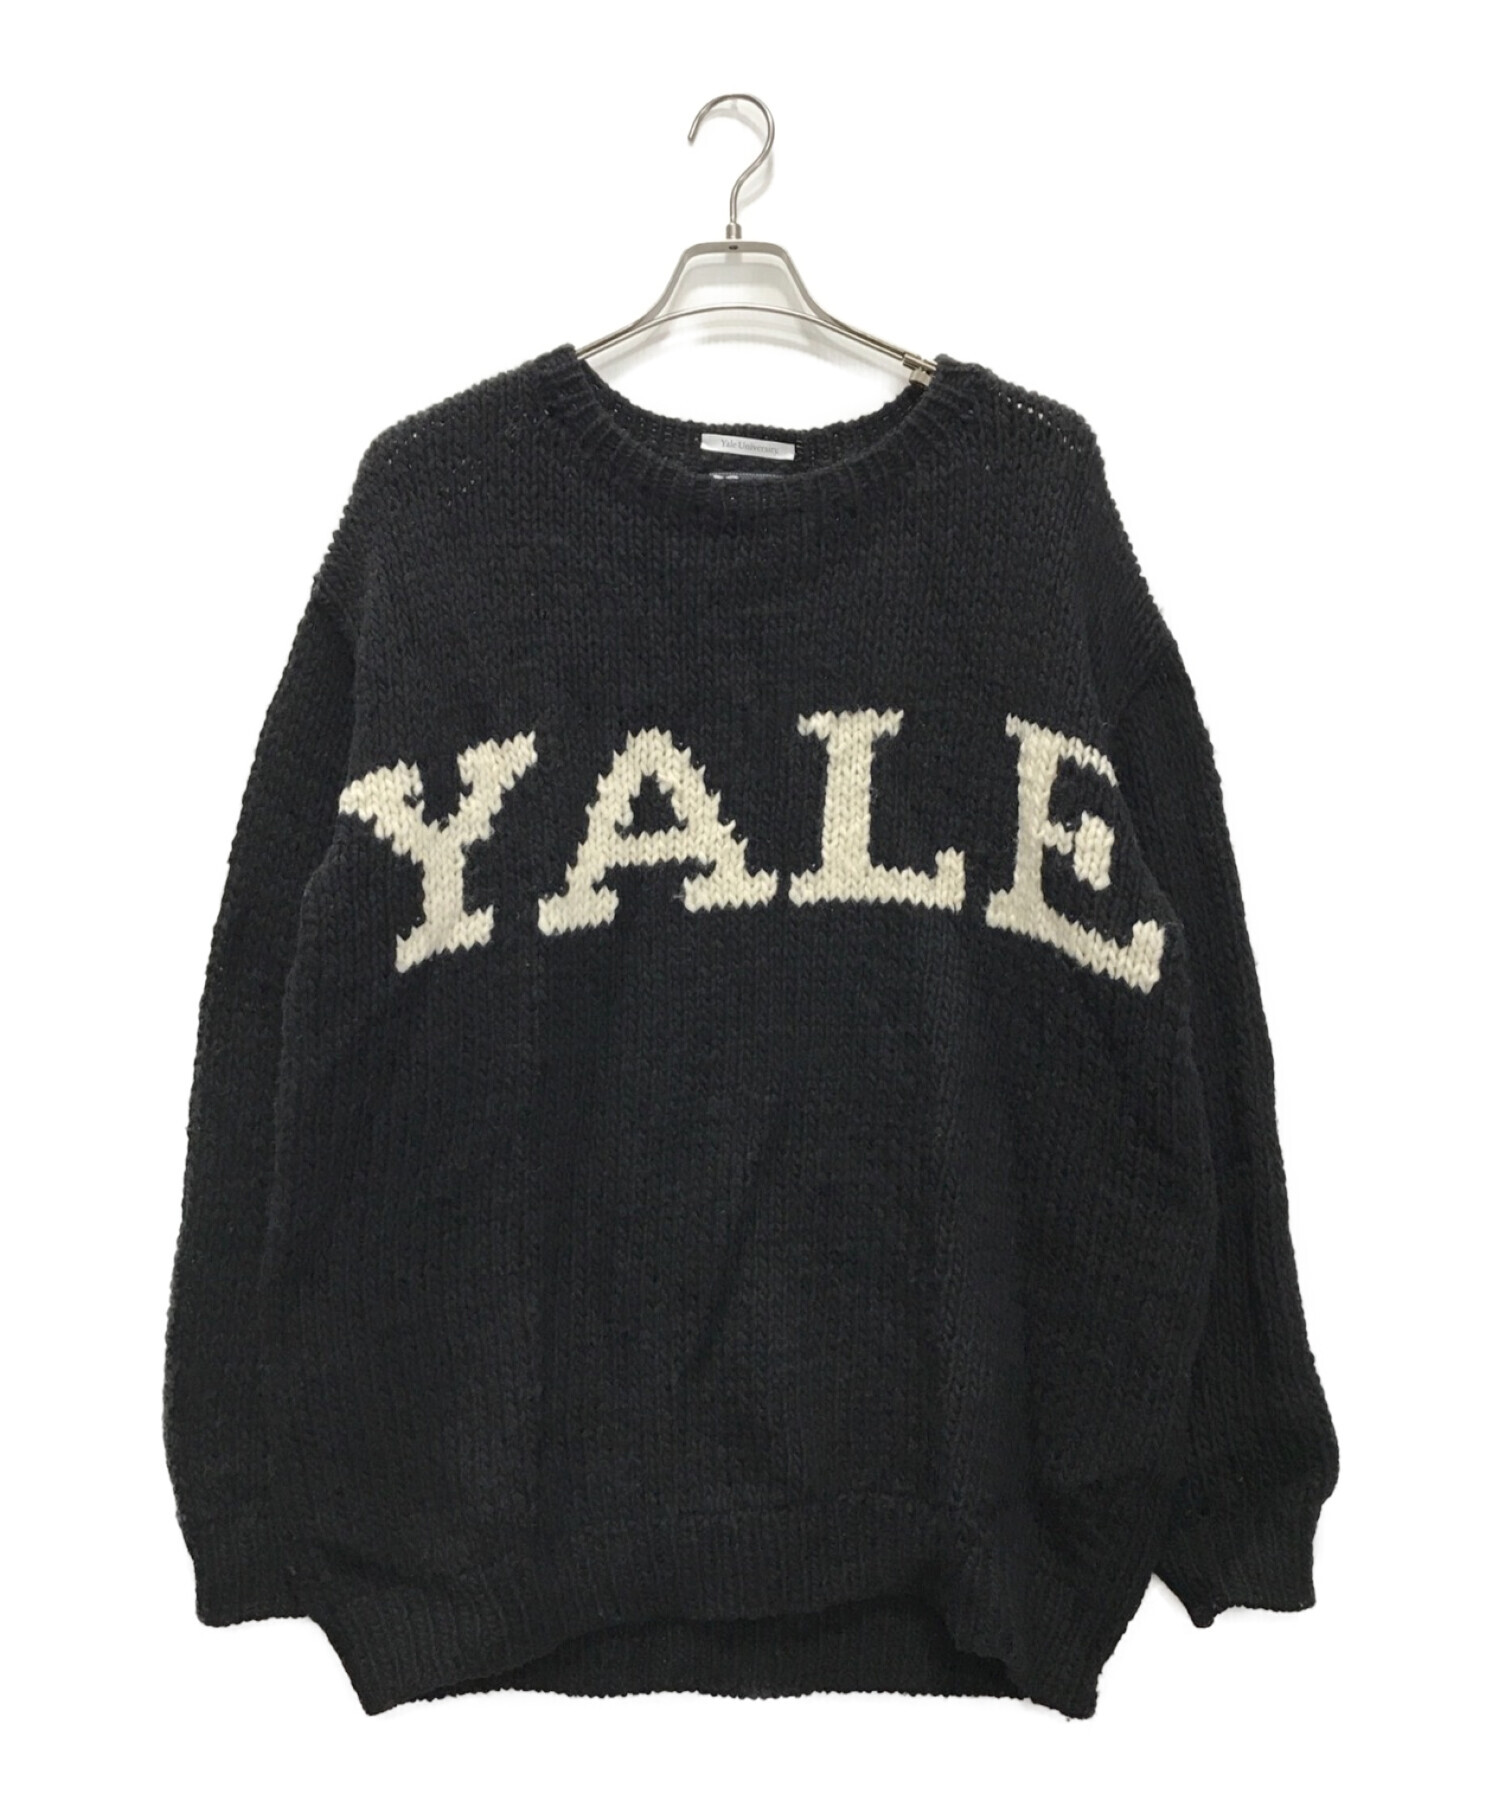 【THE BOOK STORE】 YALE WOOL HAND KNITTING